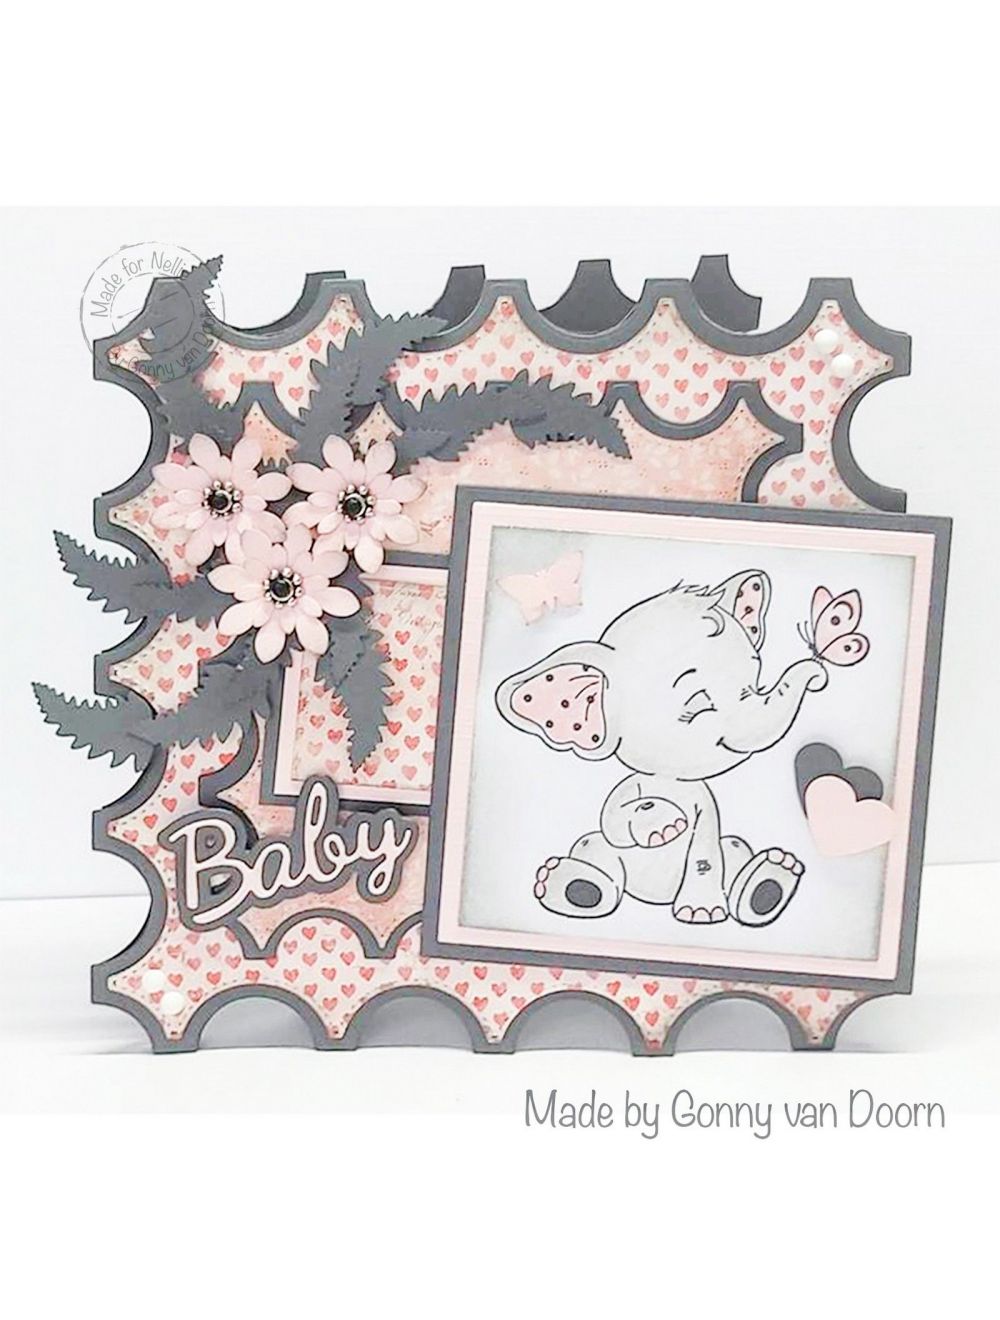 Nellie's Cuties Clear Stamp Elephant